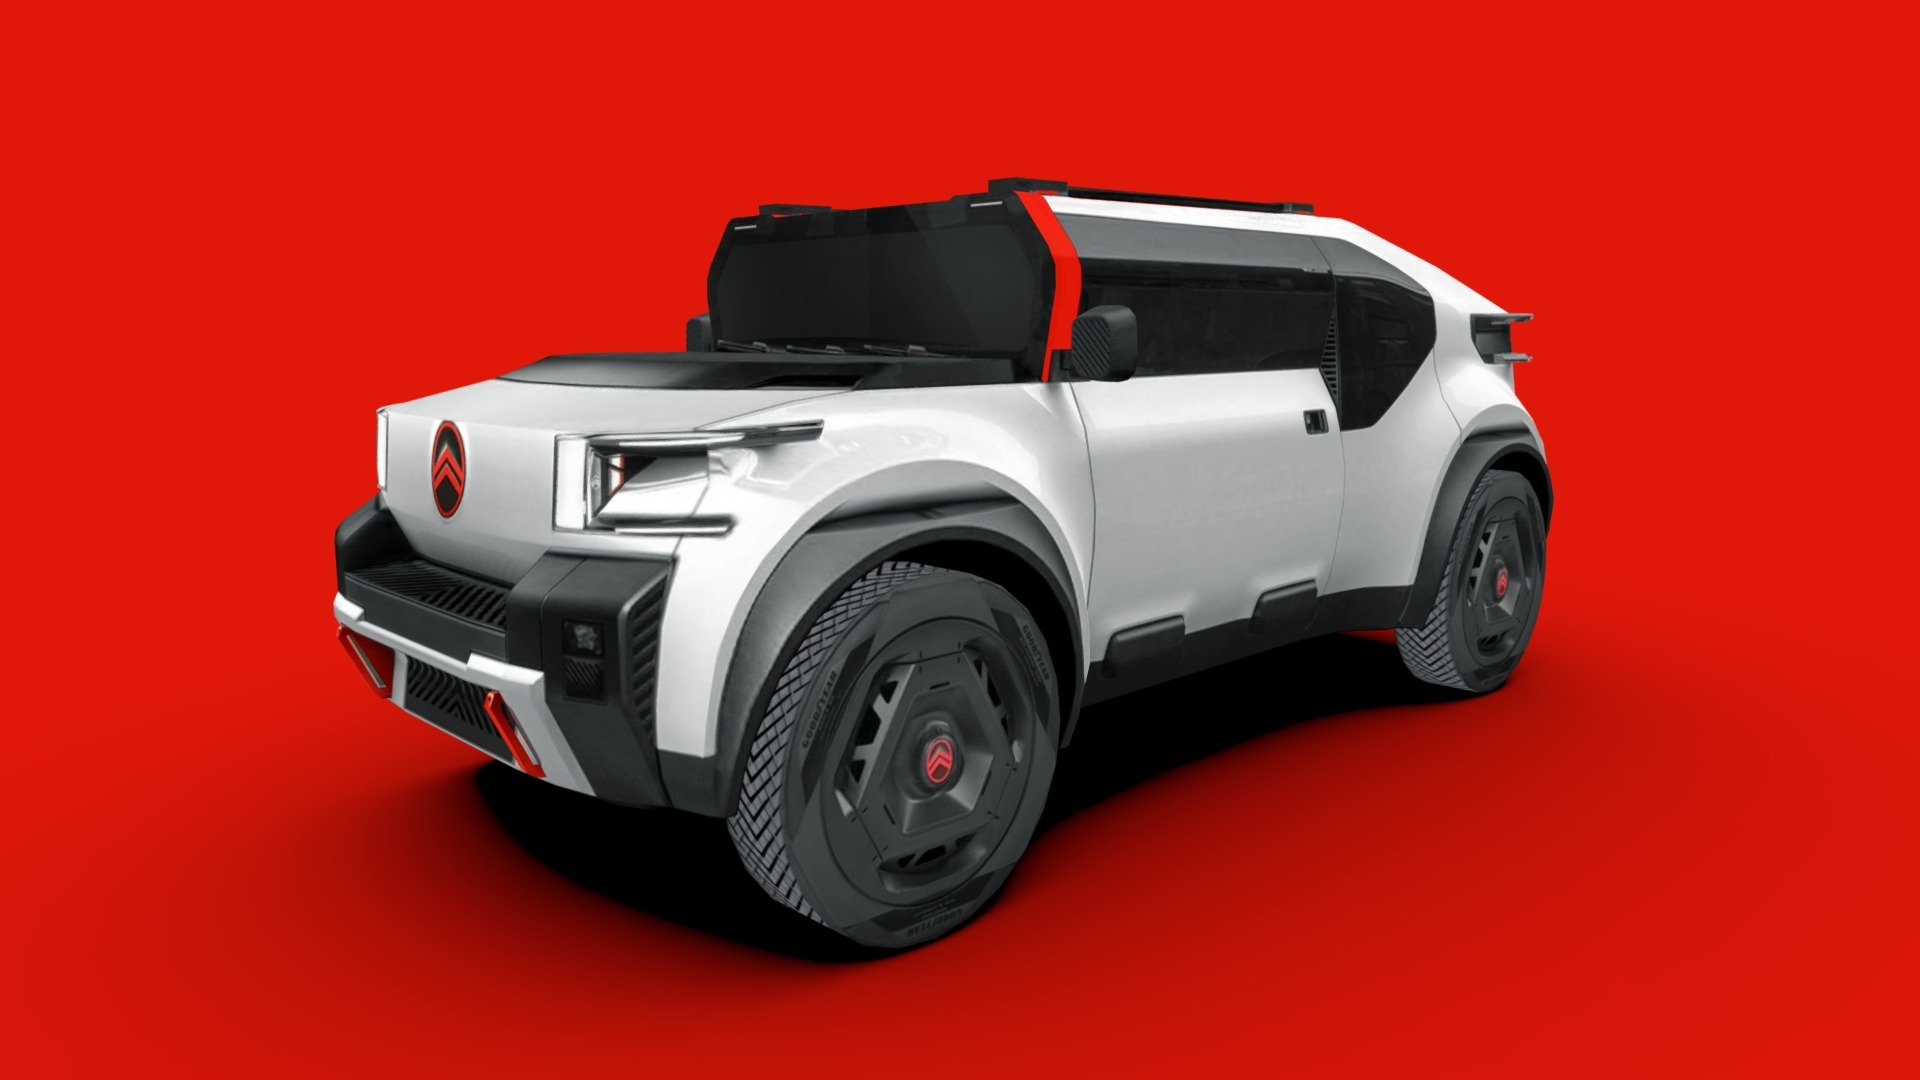 3d model of the 2022 Citroen Oli Concept, an all-electric concept car

Note that this particular model was modeled using only photos, so it is not entirely accurate.

The model is very low-poly, full-scale, real photos texture (single 2048 x 2048 png).

Package includes 5 file formats and texture (3ds, fbx, dae, obj and skp)

Hope you enjoy it.

José Bronze - Citroen Oli Concept 2022 - Buy Royalty Free 3D model by Jose Bronze (@pinceladas3d) 3d model